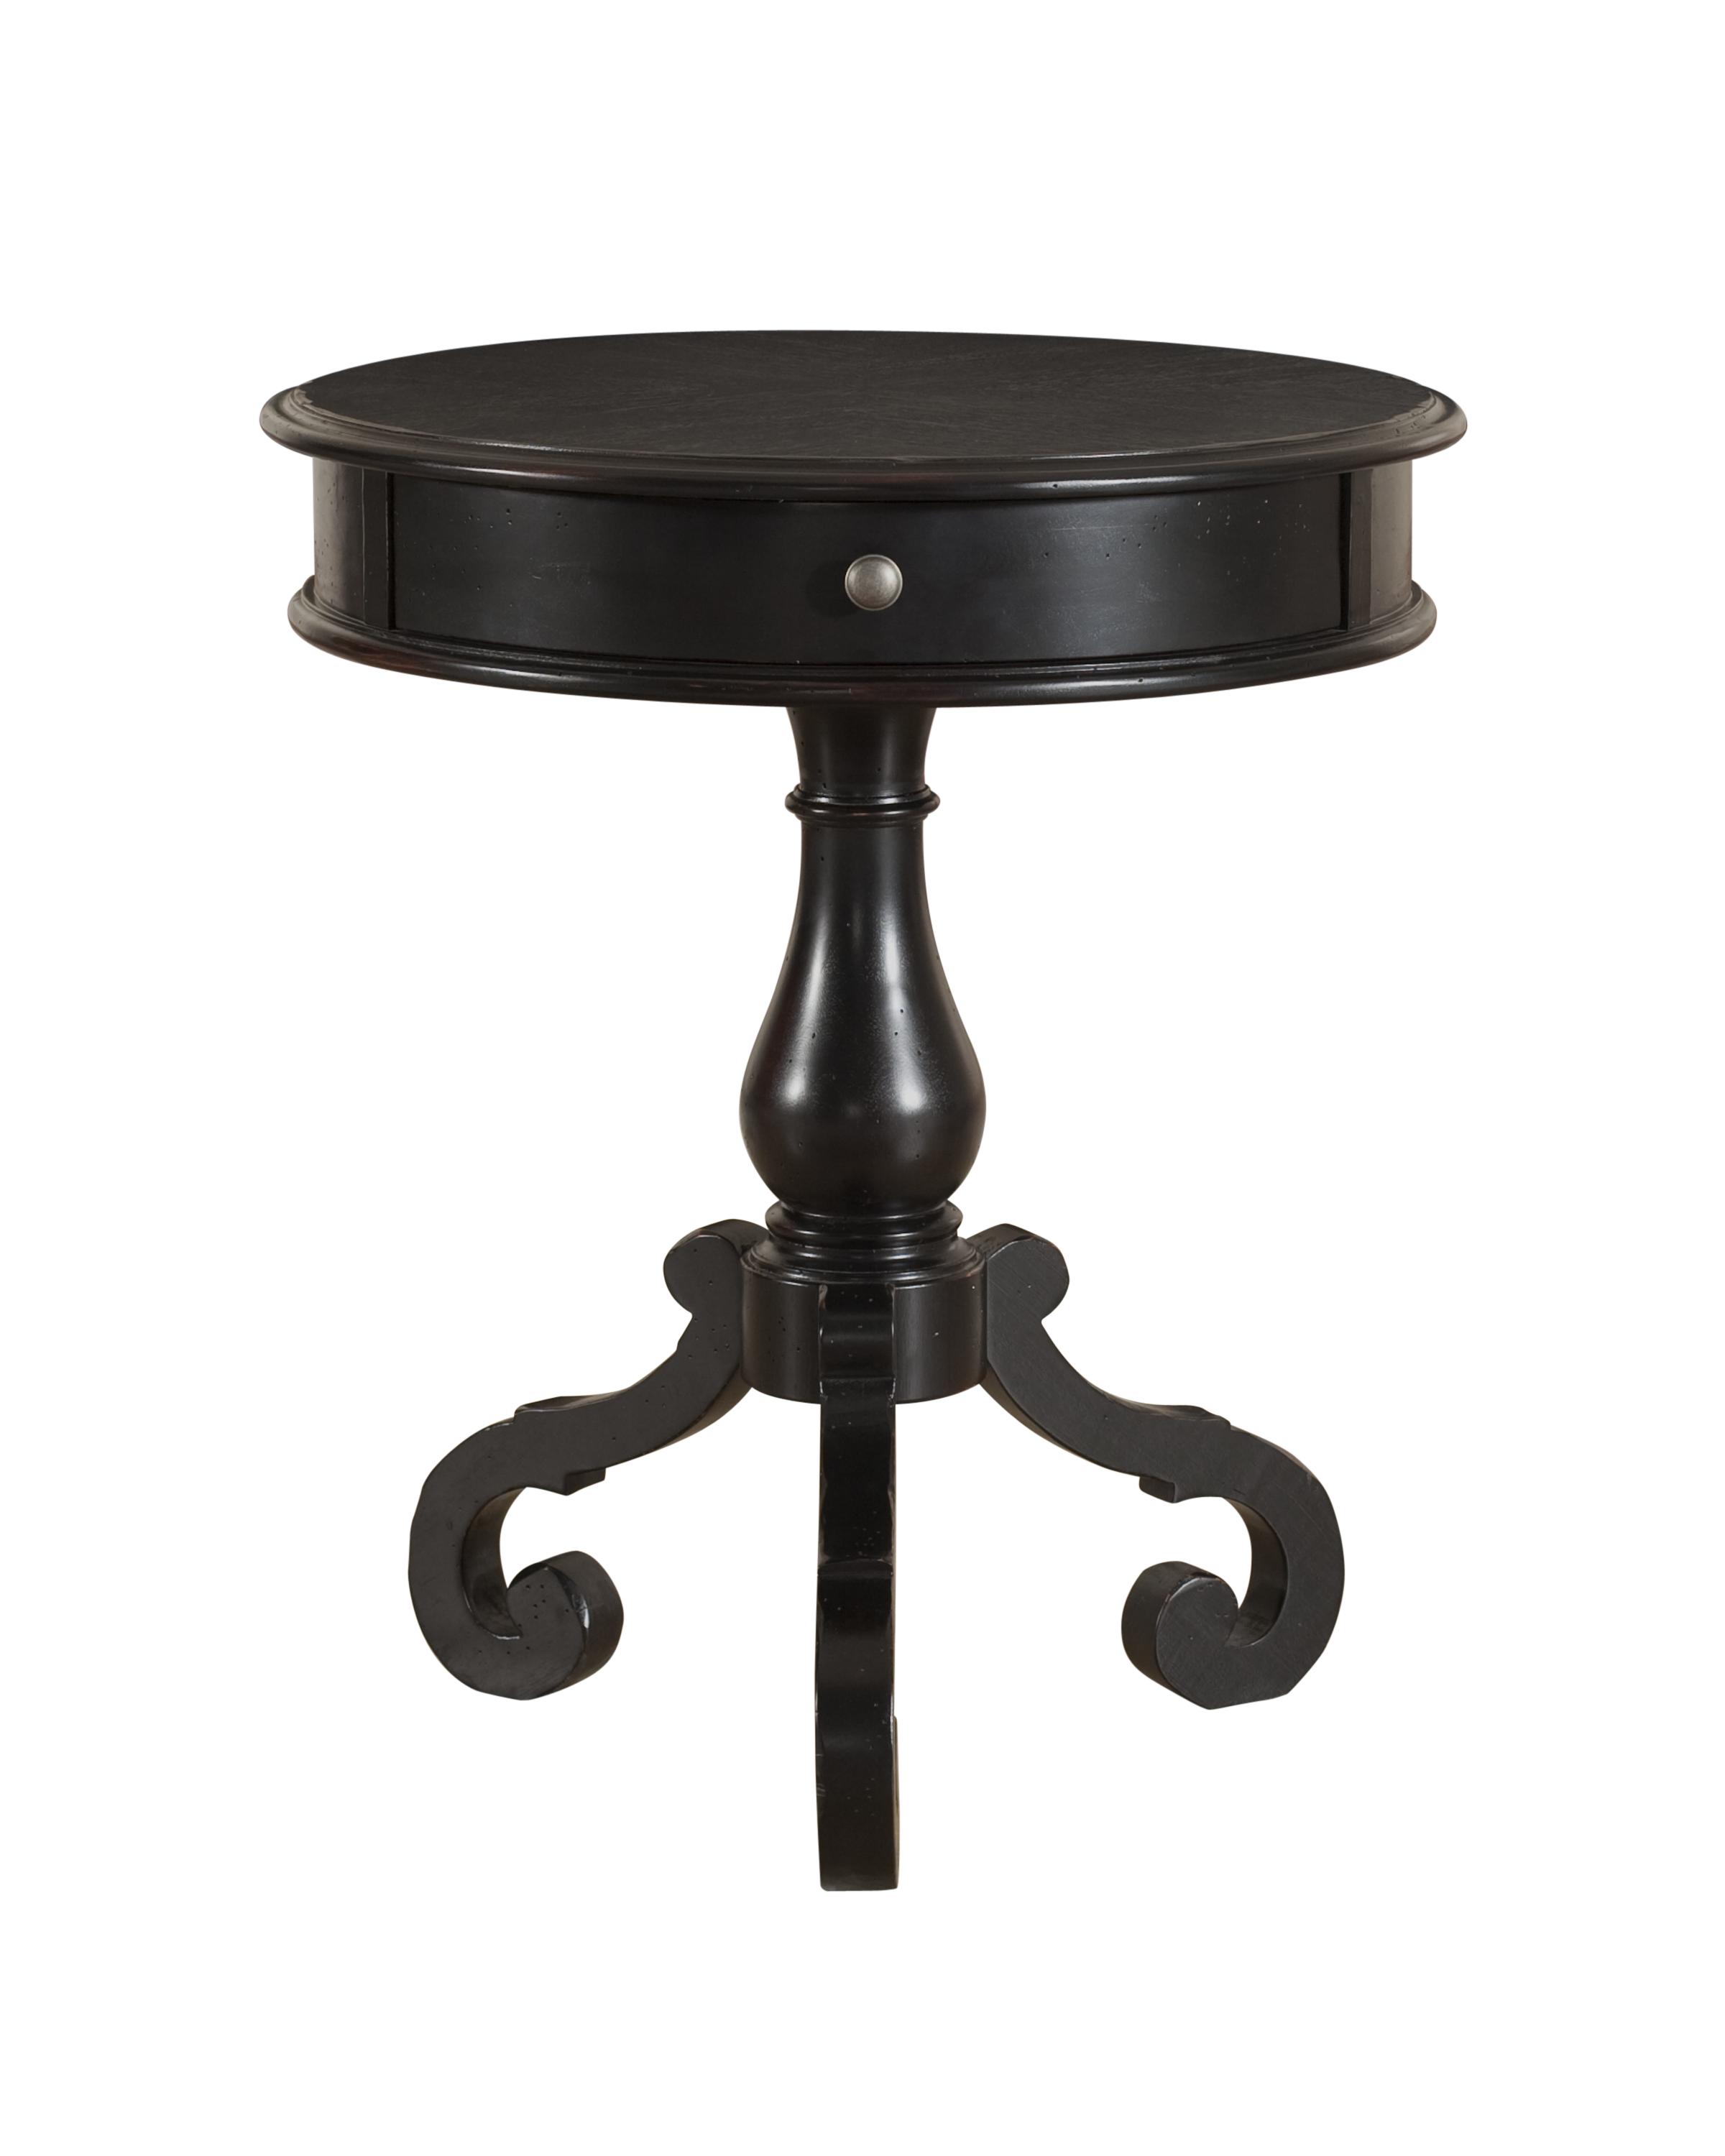 great black round accent table with home element french country wood pedestal harper and metal brushed nickel side bar height leaf teal placemats napkins rustic chairs pair